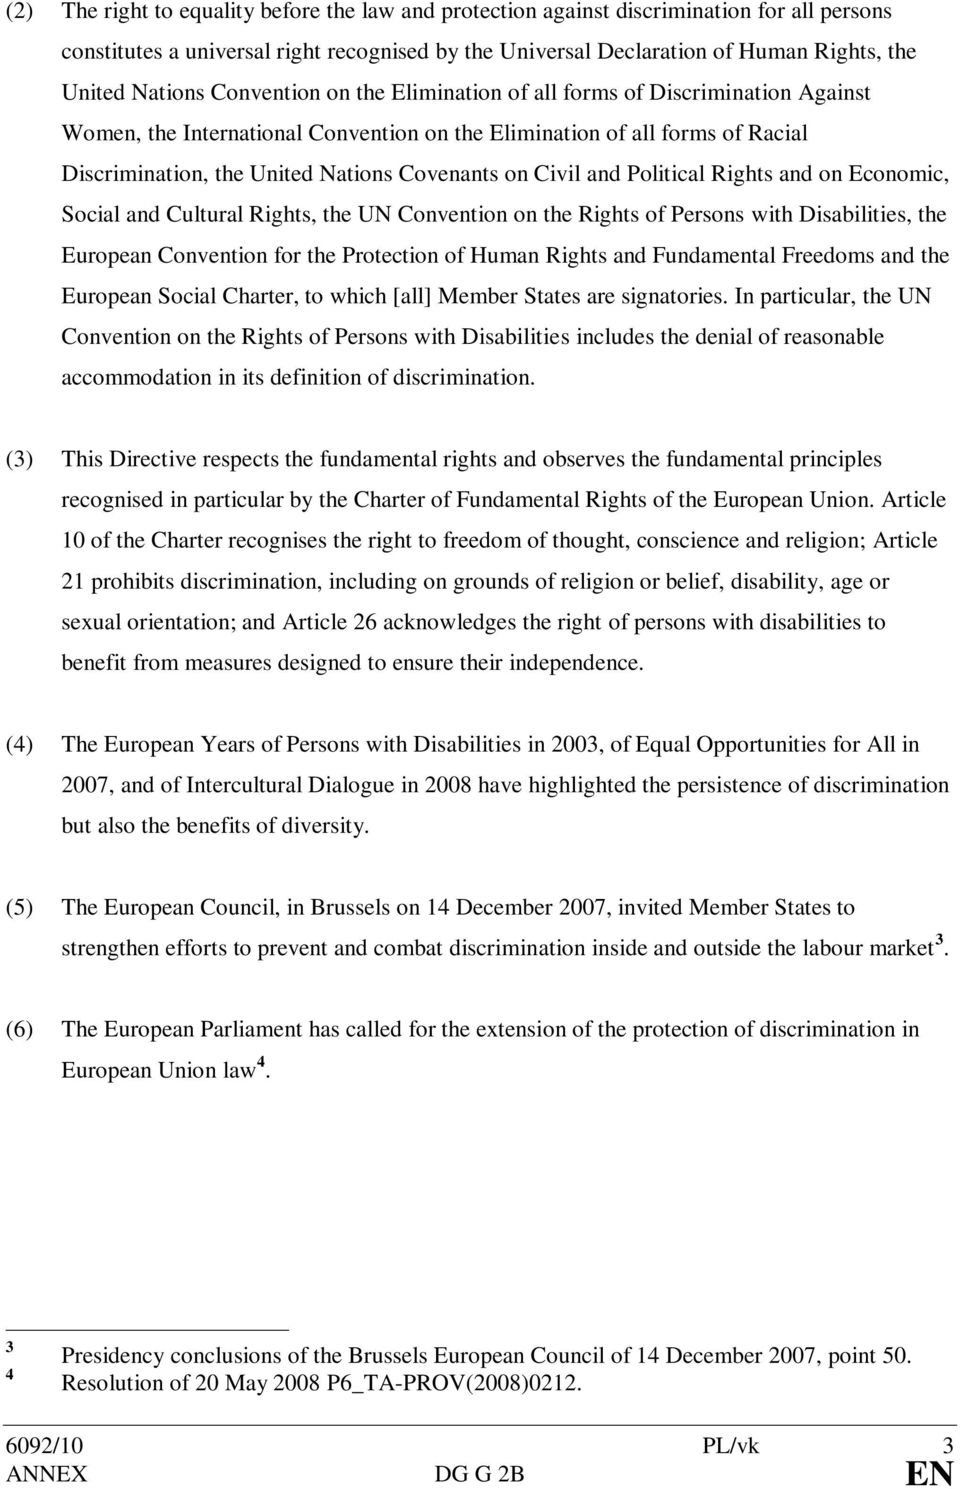 on Civil and Political Rights and on Economic, Social and Cultural Rights, the UN Convention on the Rights of Persons with Disabilities, the European Convention for the Protection of Human Rights and